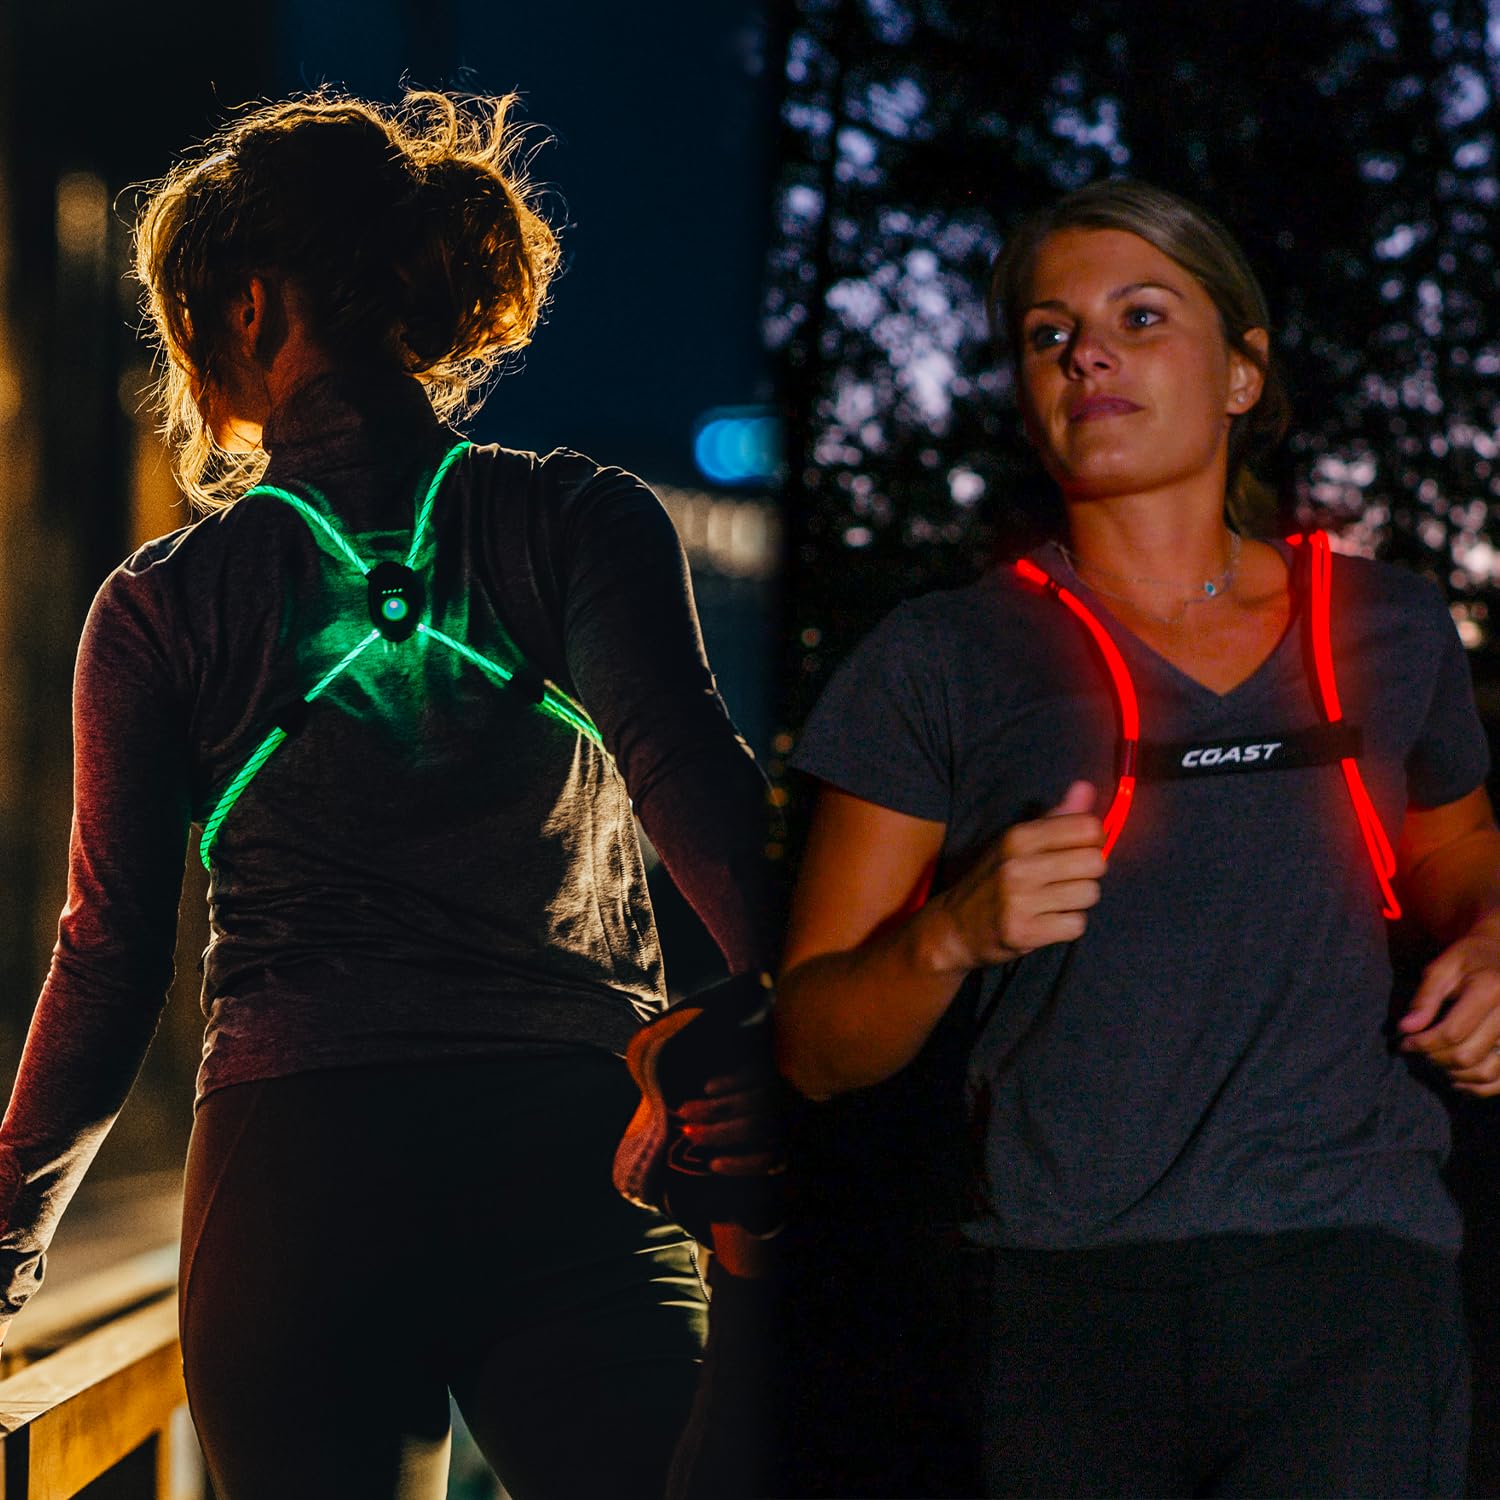 COAST LH150 Rechargeable LED Hi-Vis Lighted Vest, 6+ Color Modes, Reflective, Ultralight, One Size Fits Most